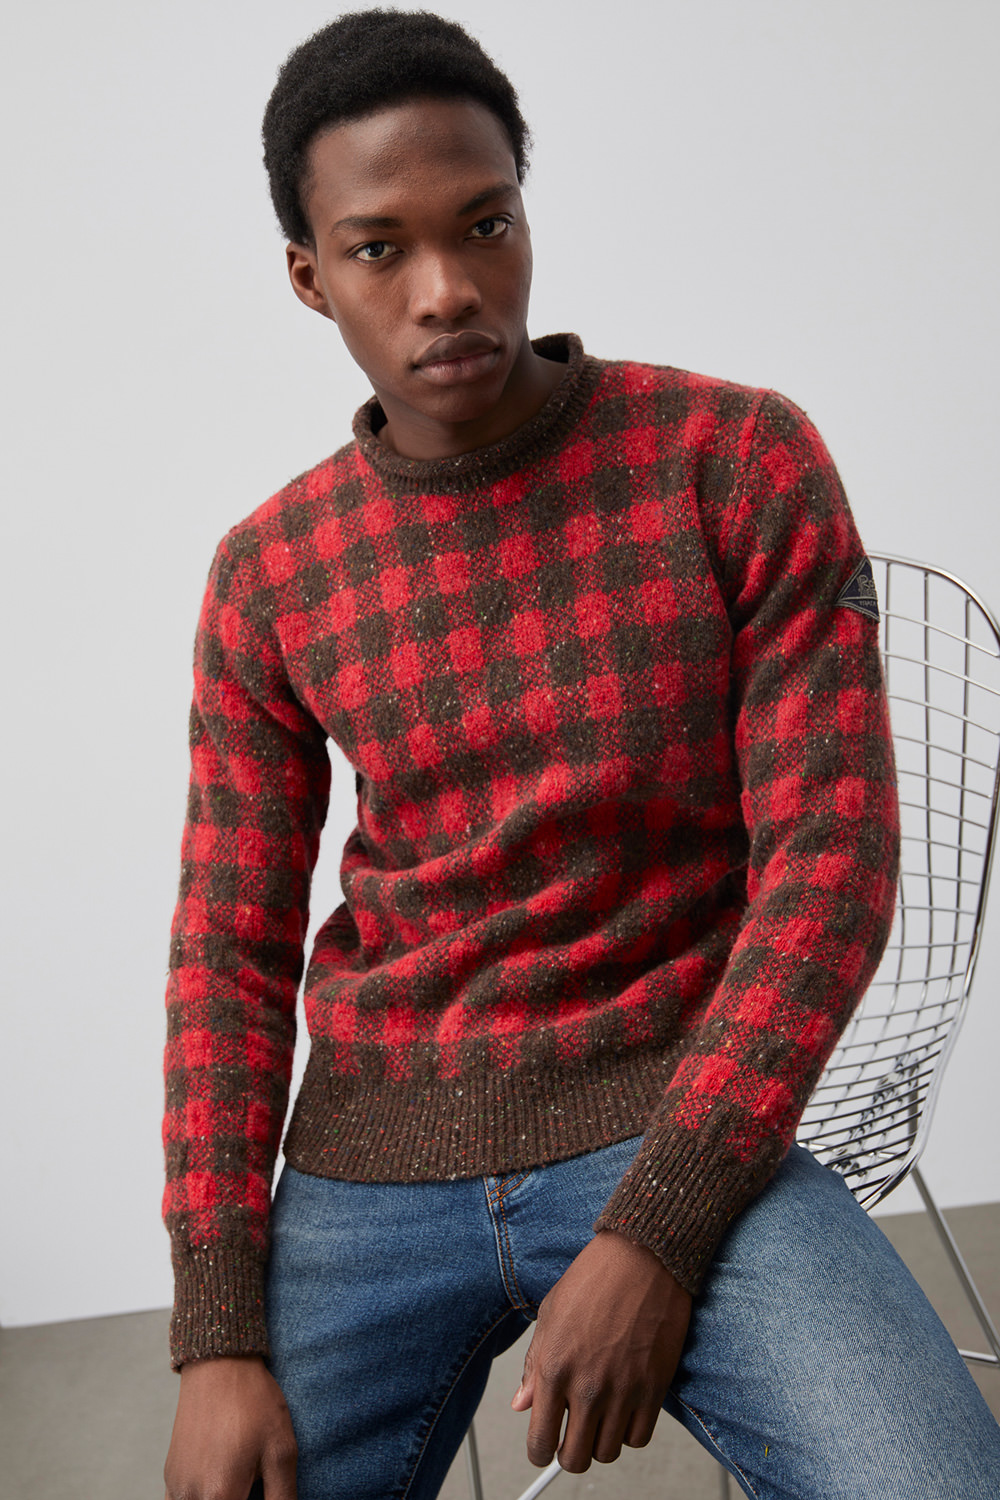 ROY ROGERS: CREW NECK SWEATER IN CHECK PRINT TEXTURED YARN